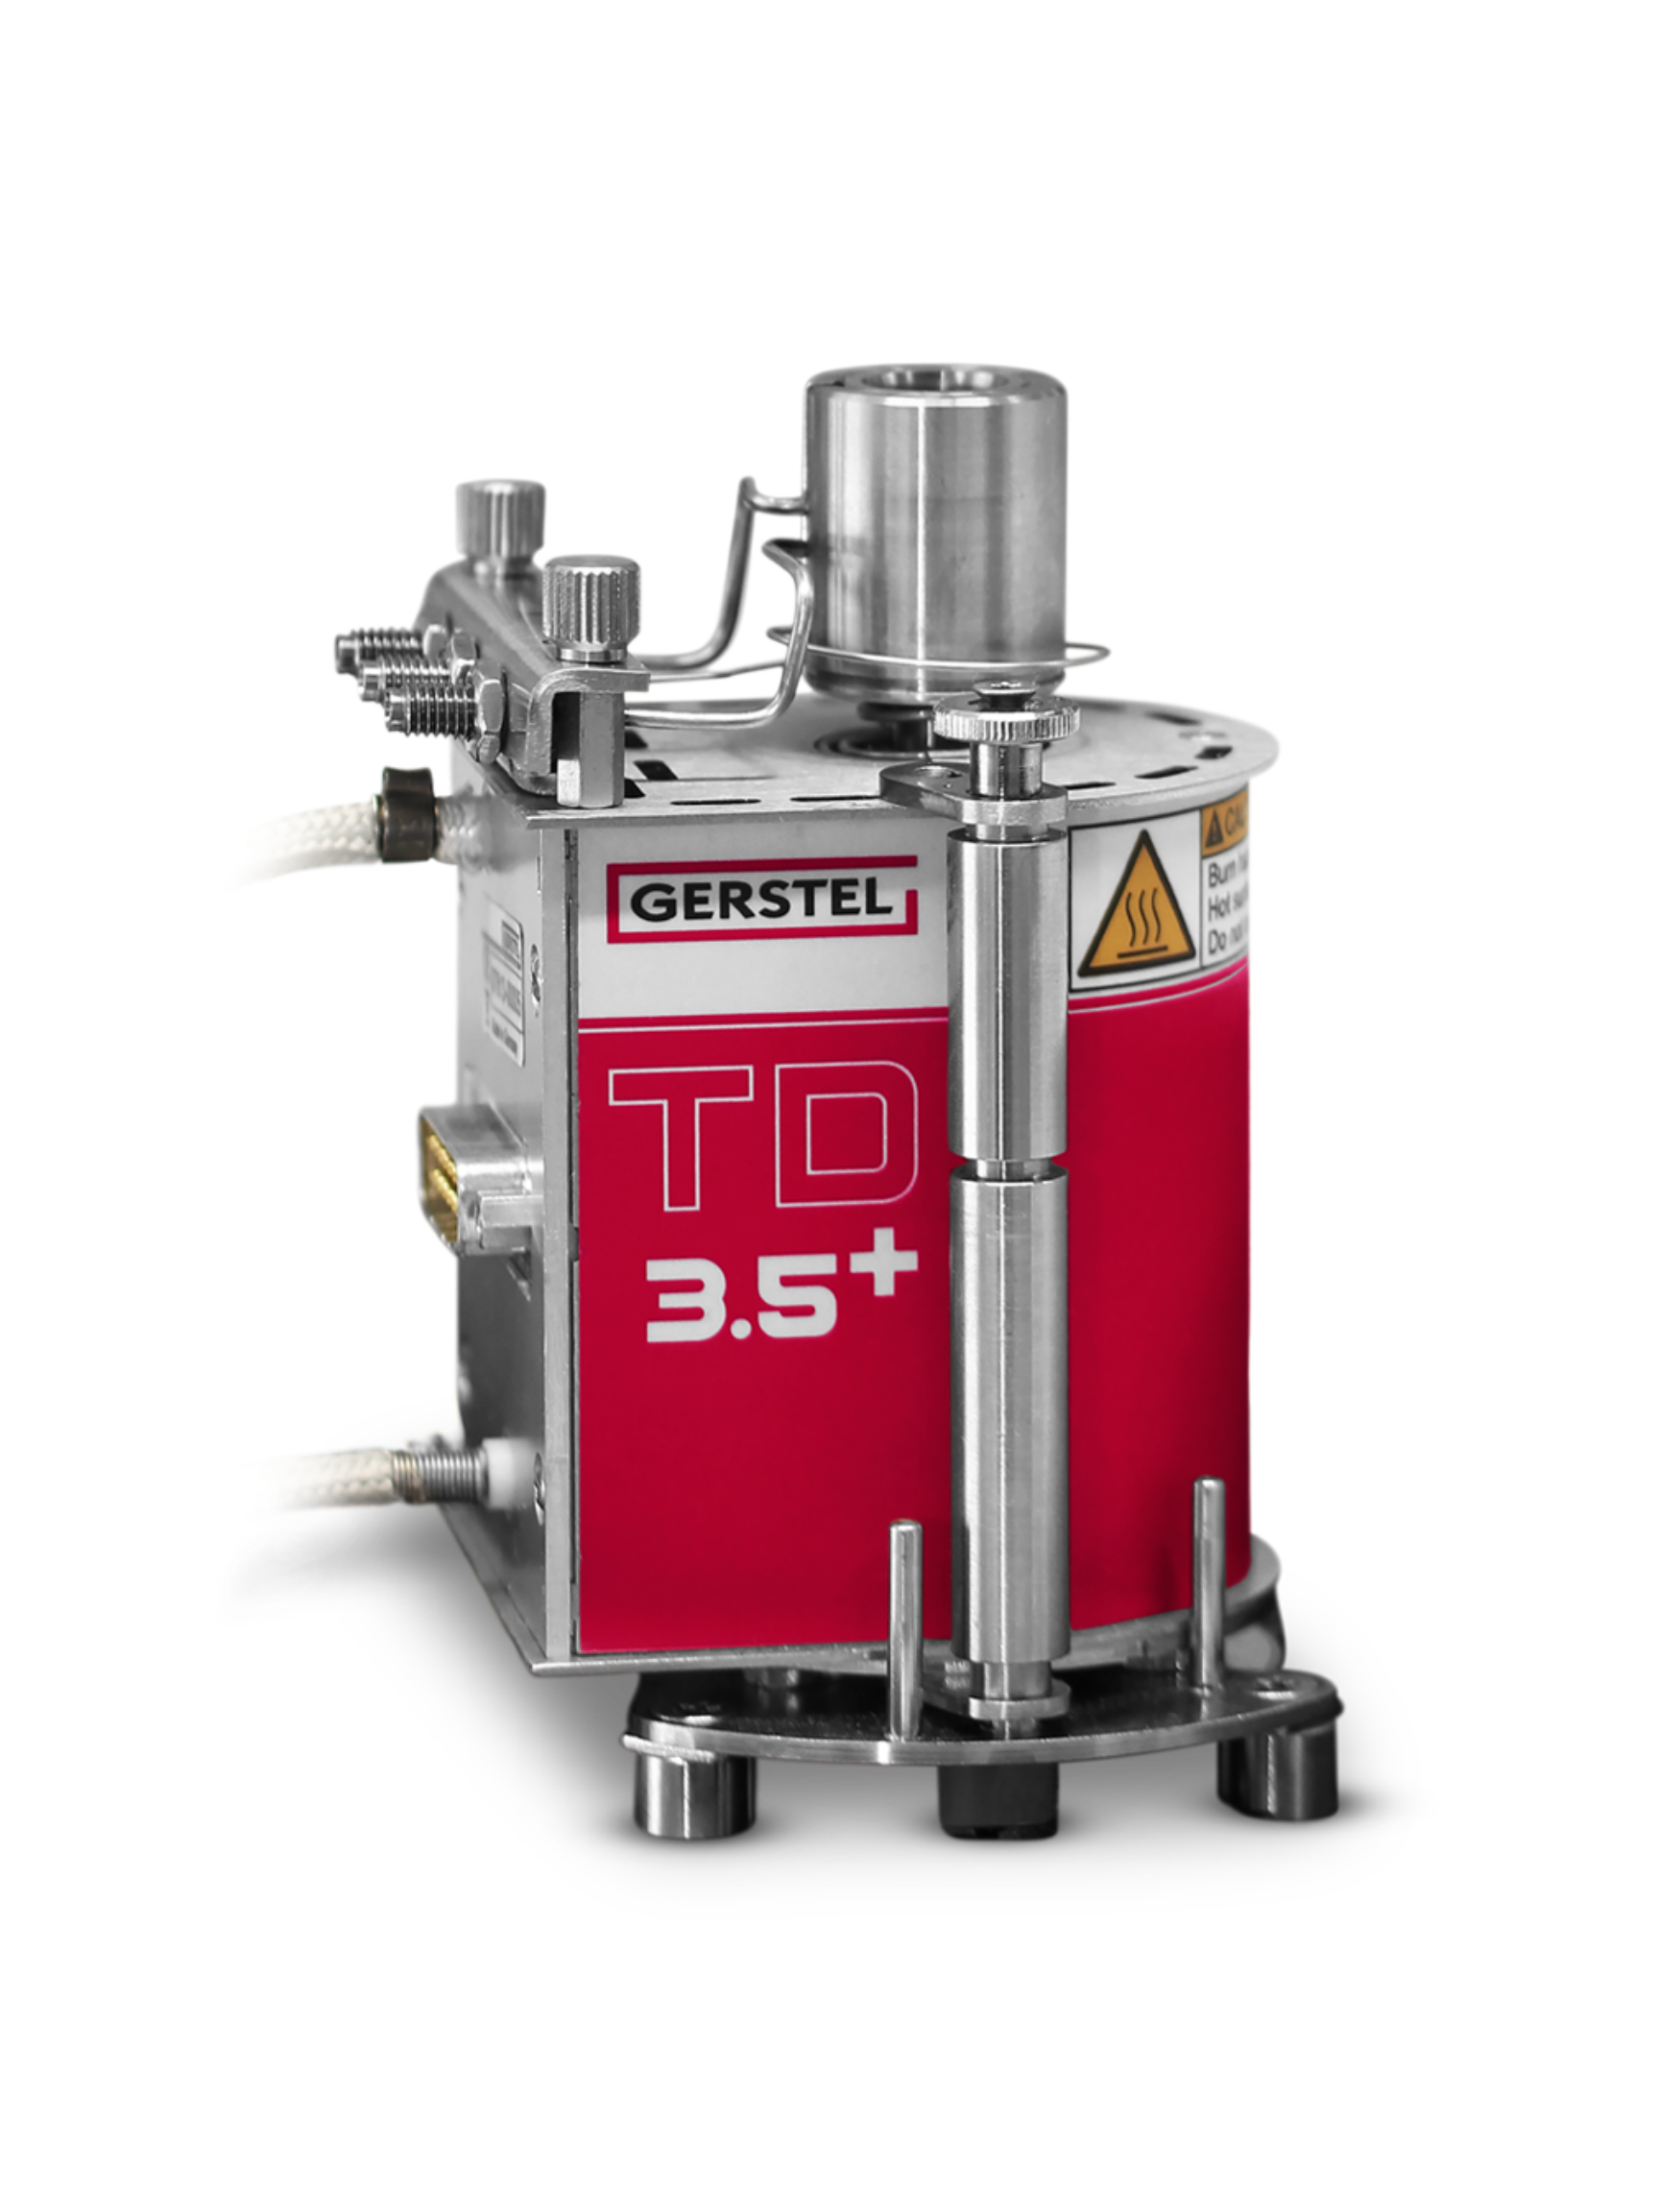 TD-3.5 TD-GC-MS/MS: The Optimal Solution for Determining PFAS in Air